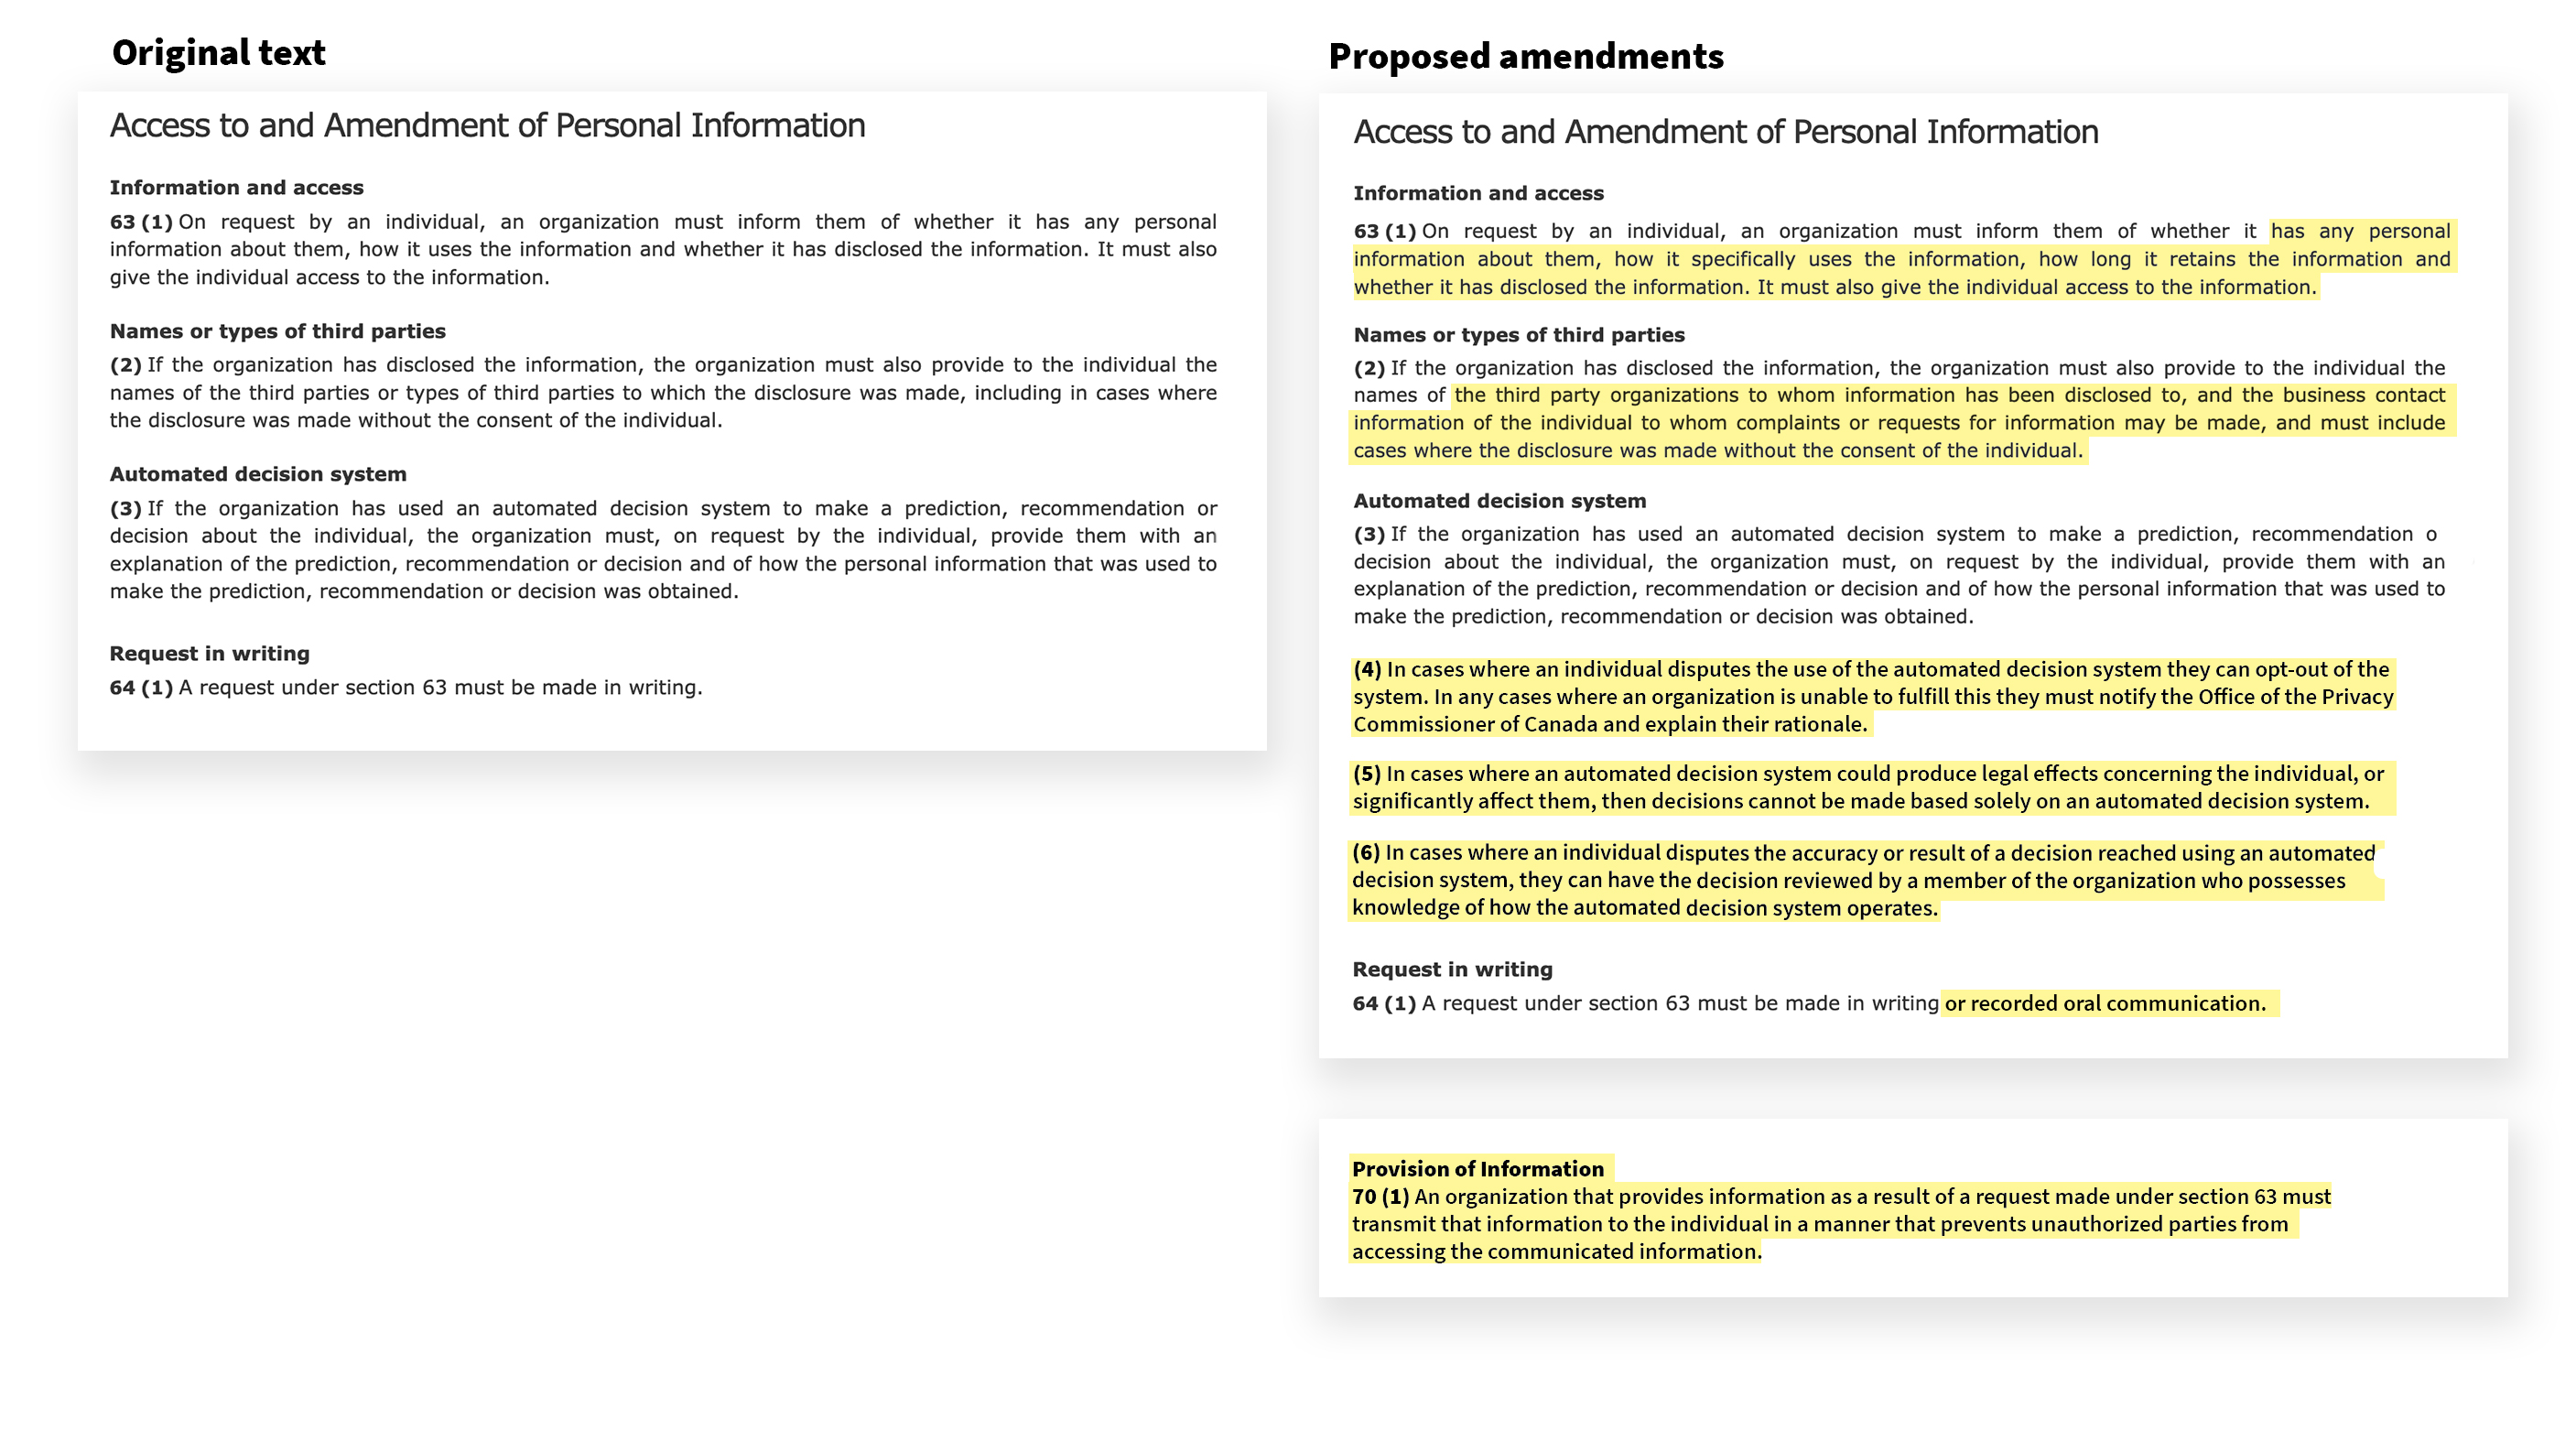 Screengrab of the original bill and proposed amendments to the Bill side by side.